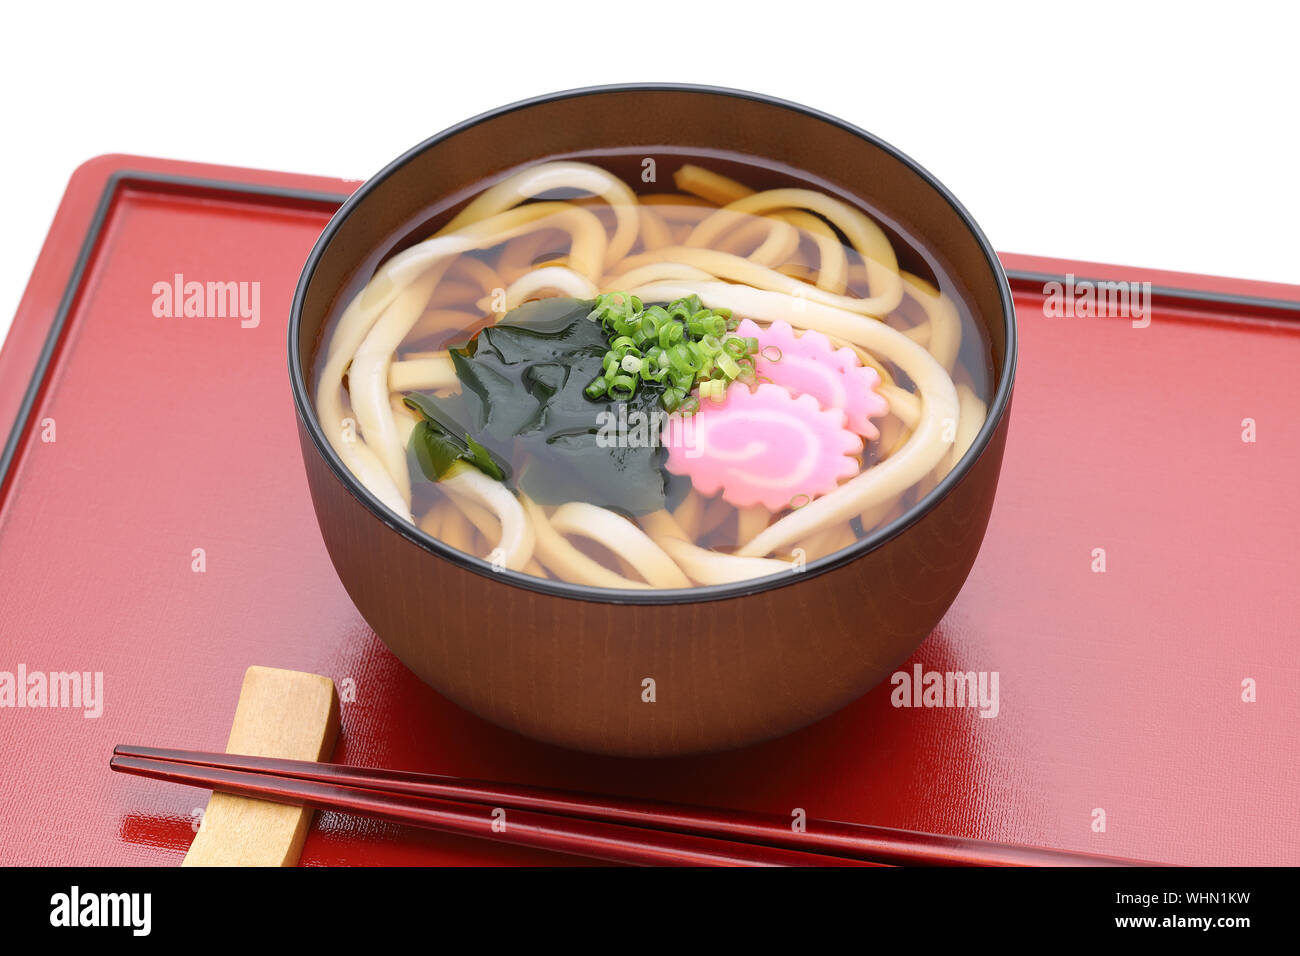 Japanese Kake udon noodles in a bowl Stock Photo